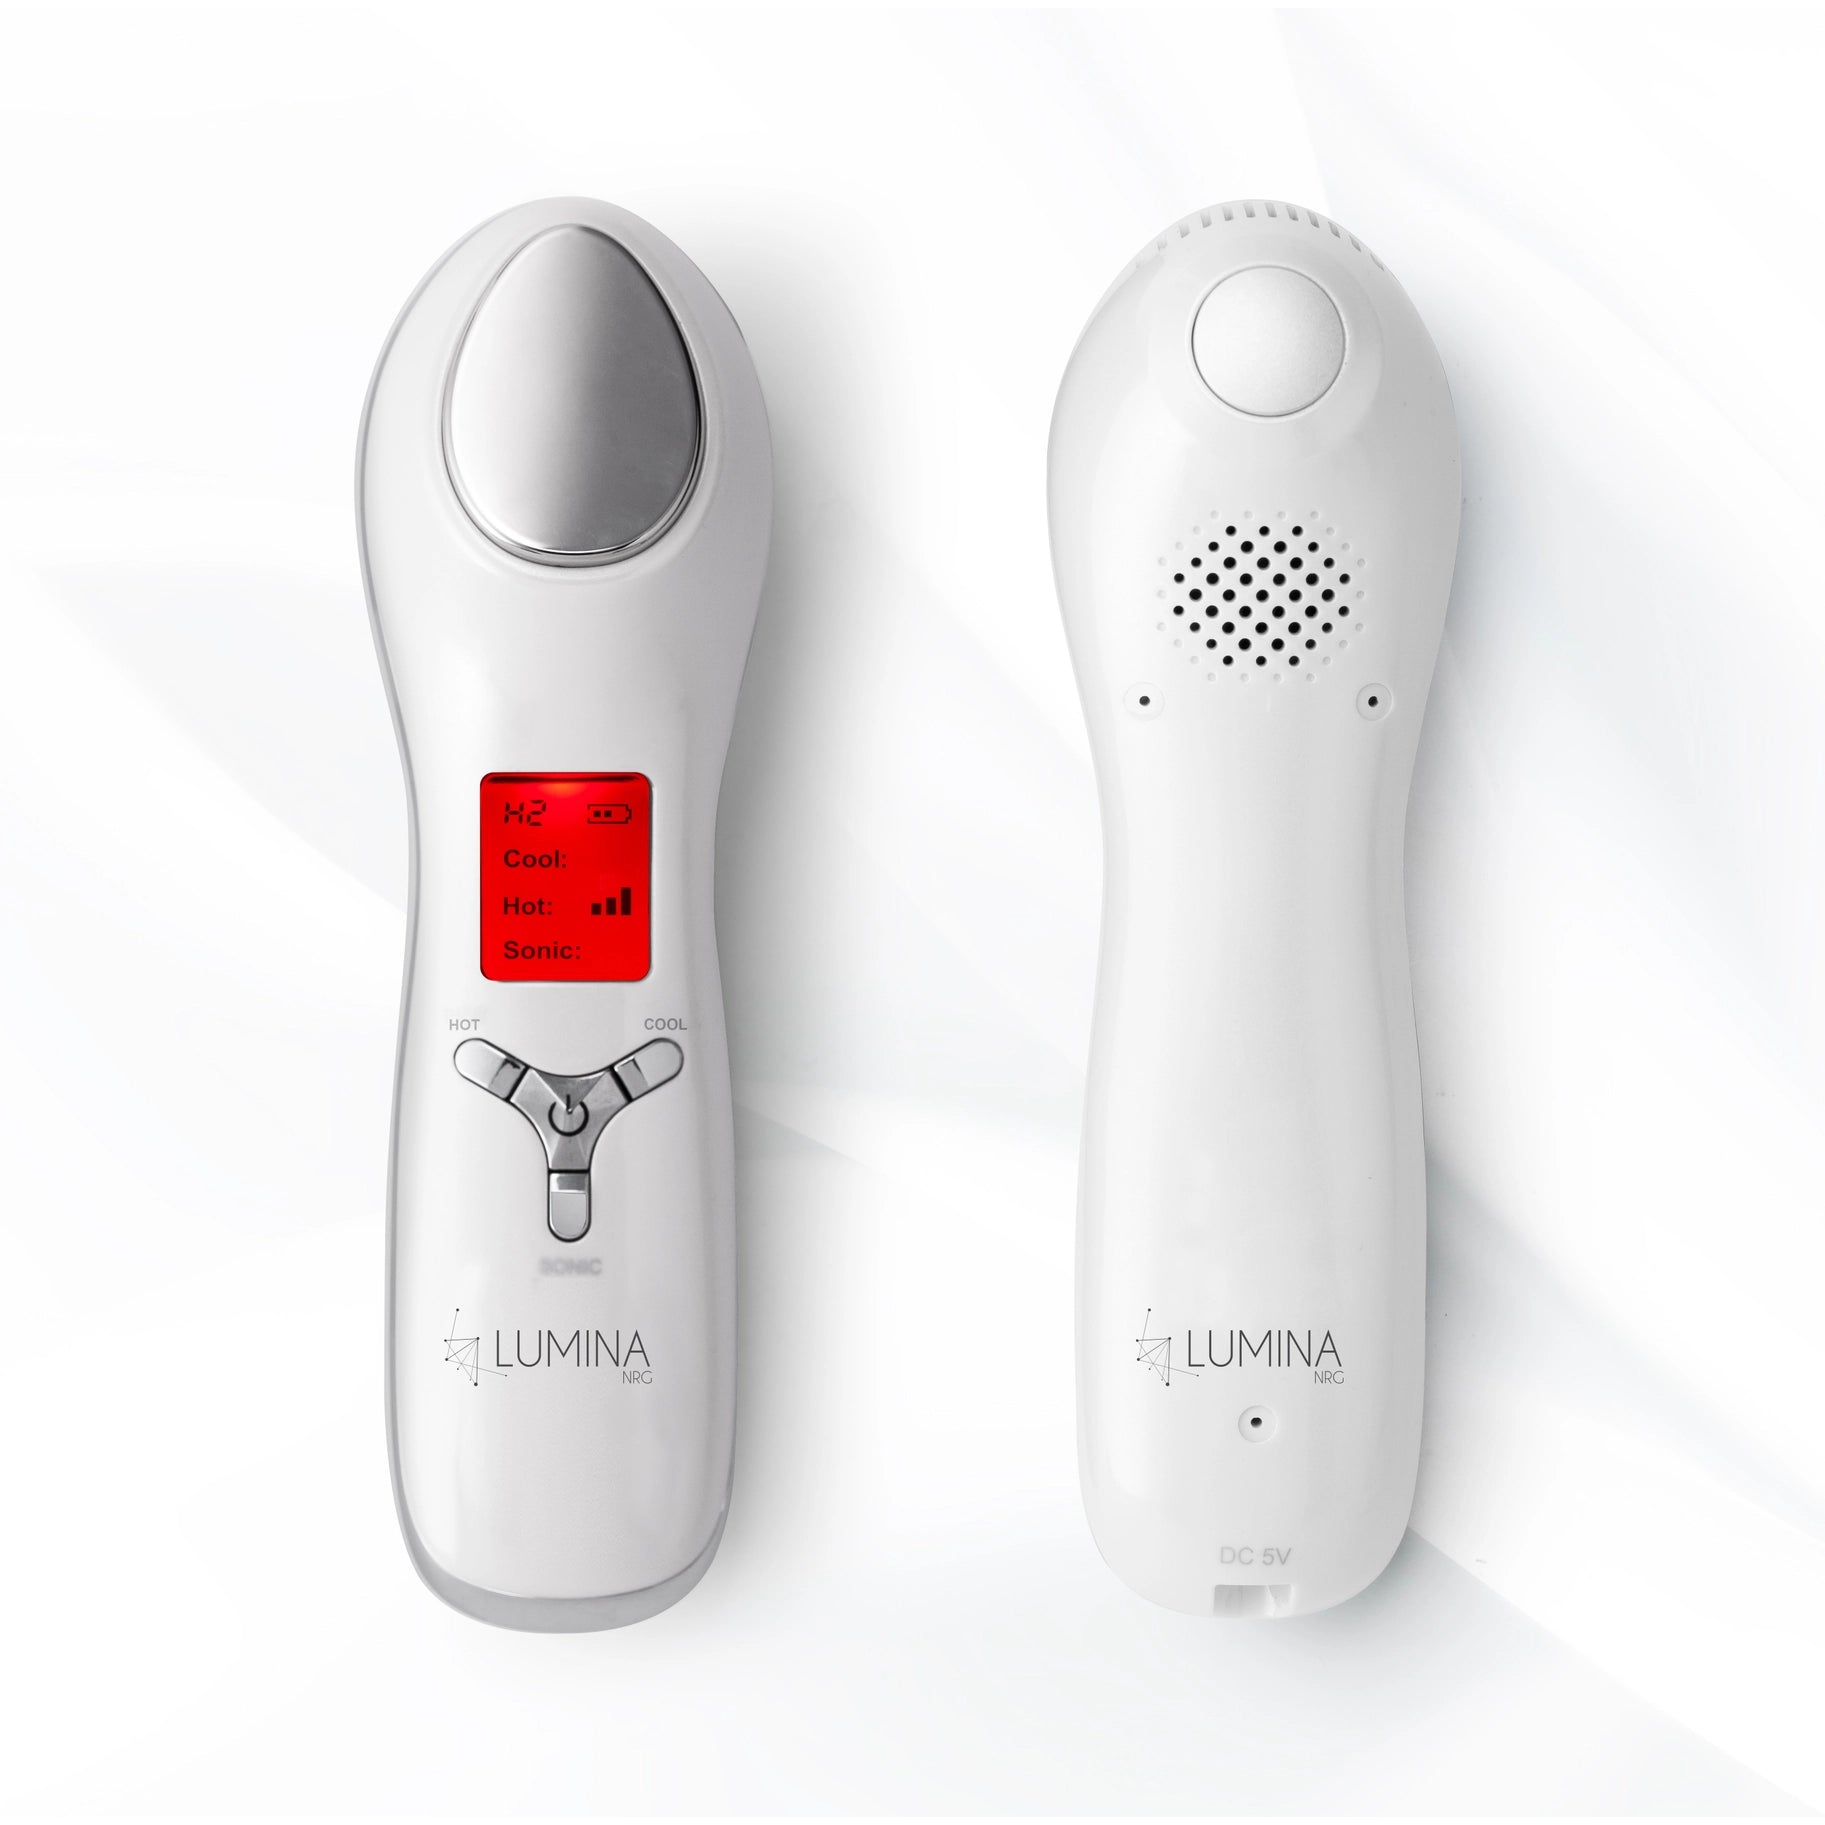 LUMINA NRG Dual Ultrasonic Cream Infuser [IN-STORE PURCHASE ONLY]